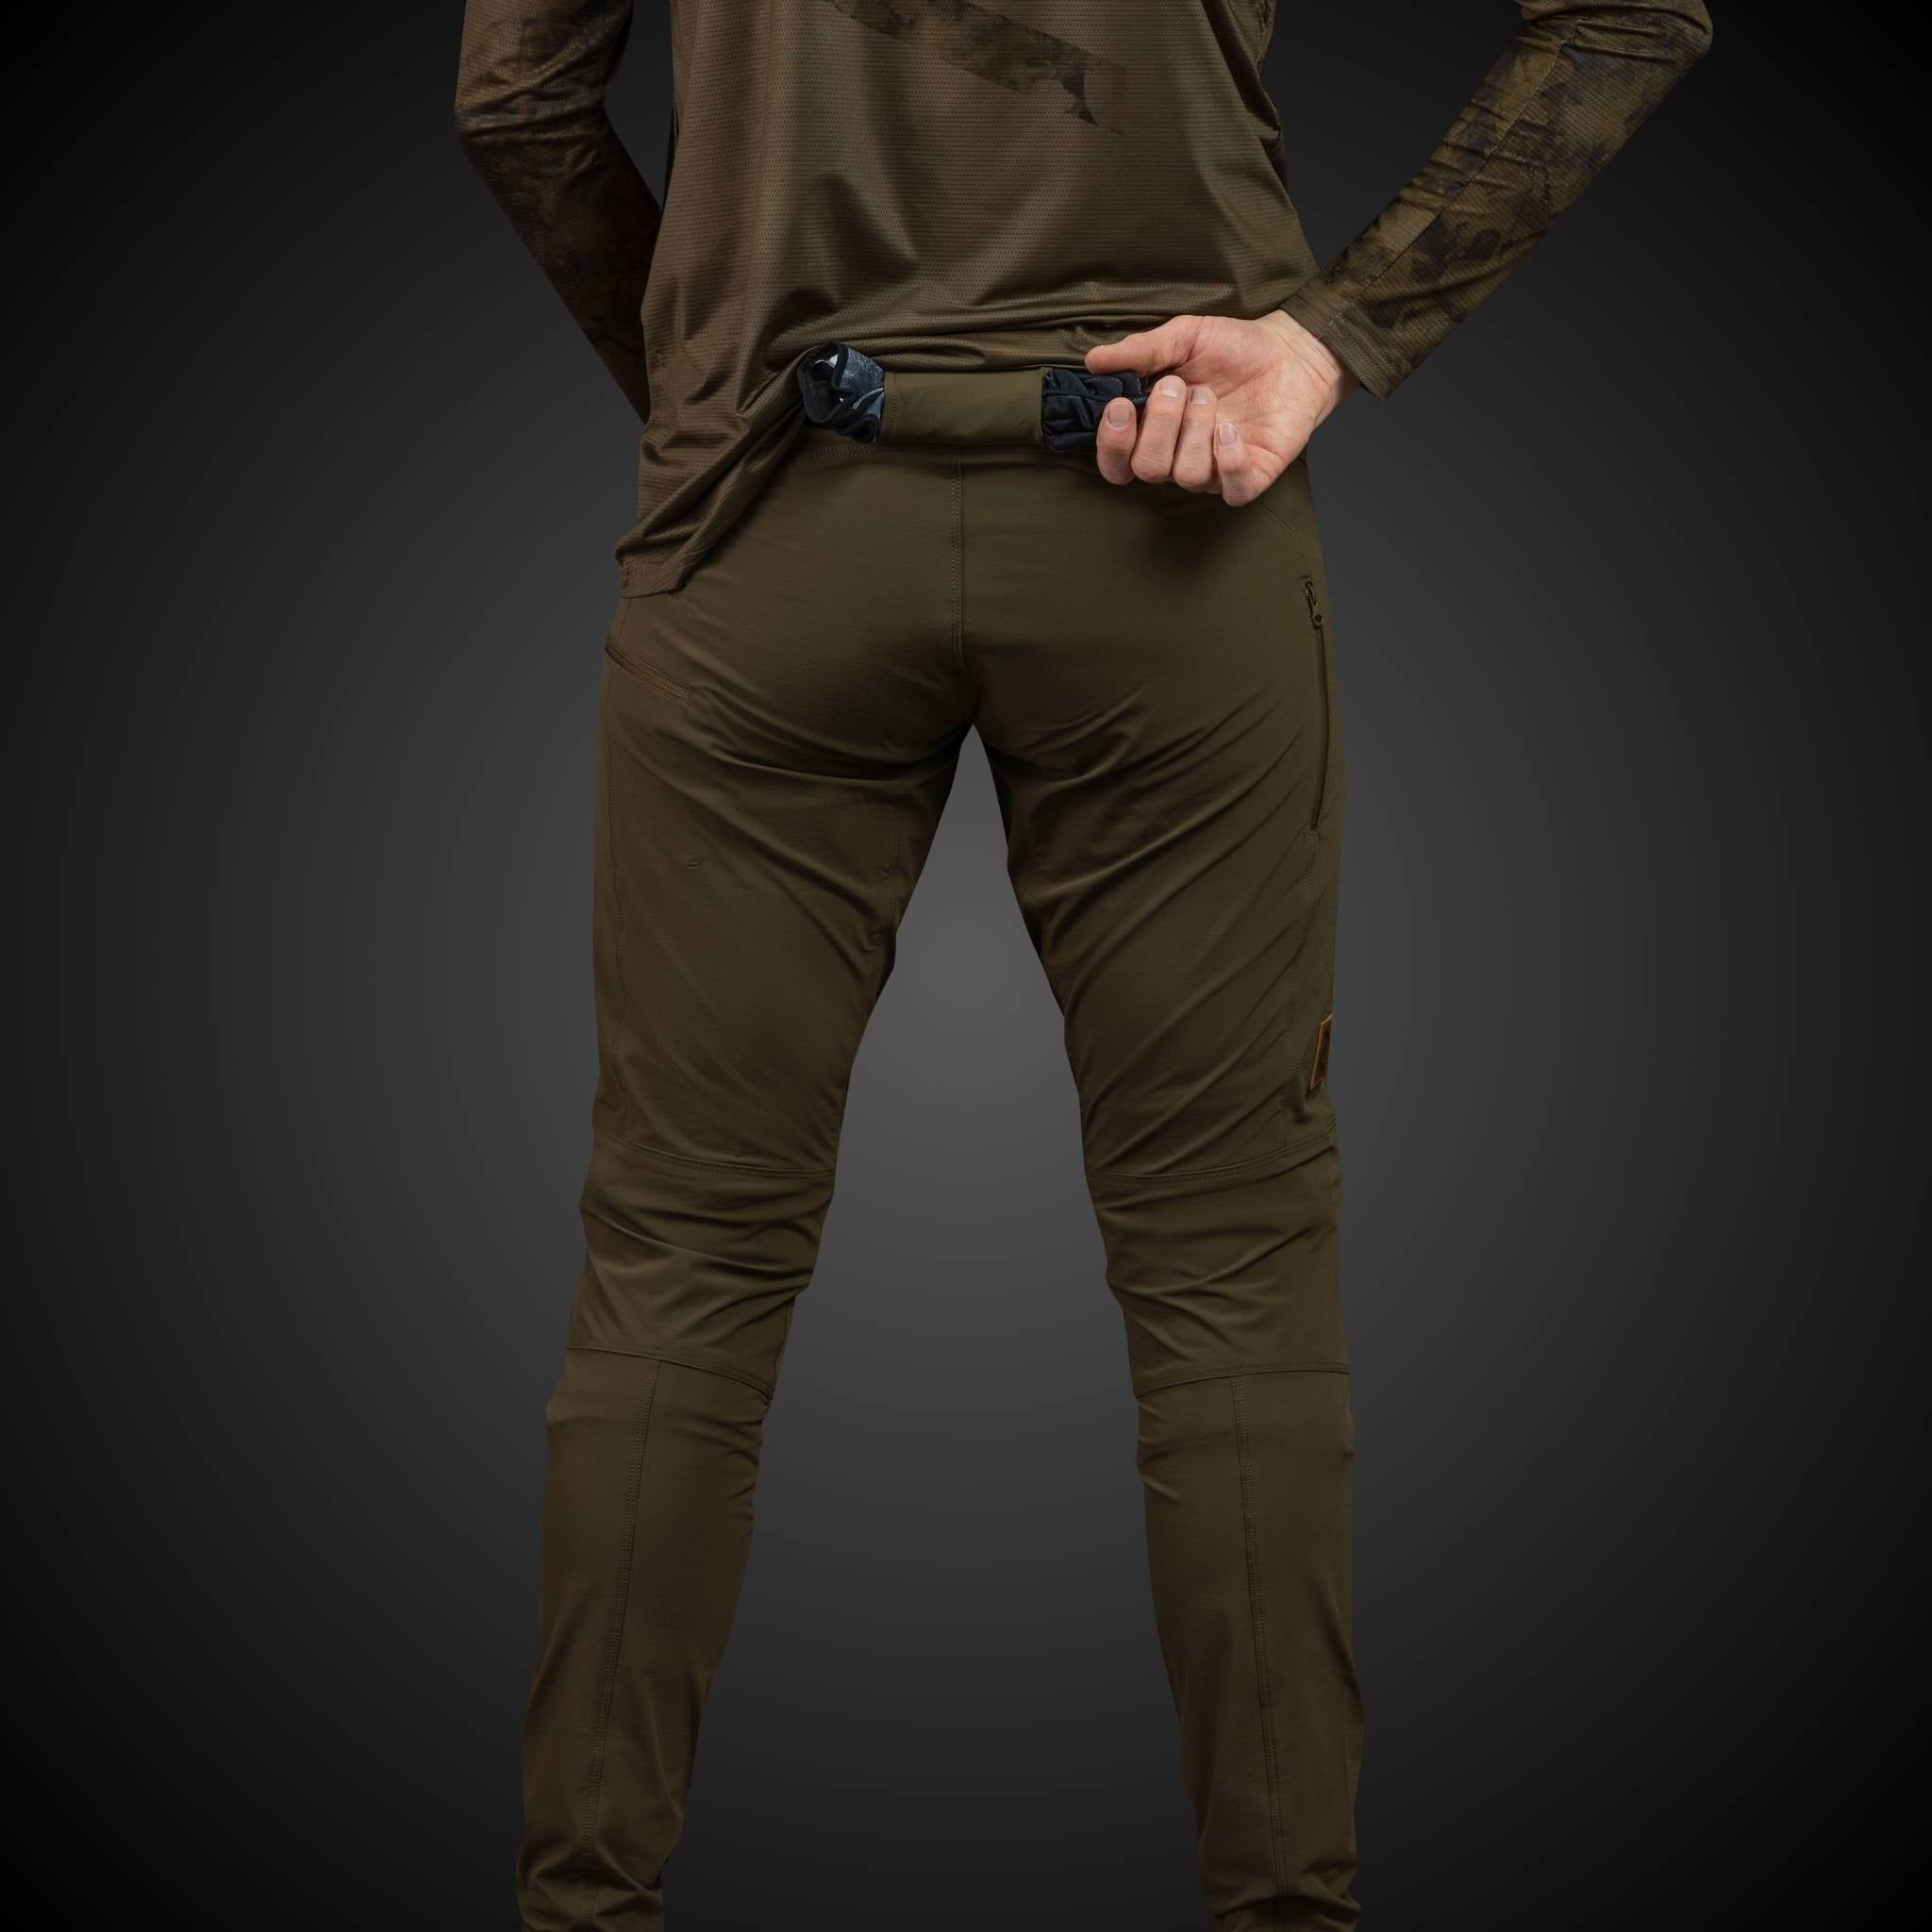 Durable khaki MTB pants from the Gravity 1.02 series, crafted for optimal performance and comfort in diverse biking environments